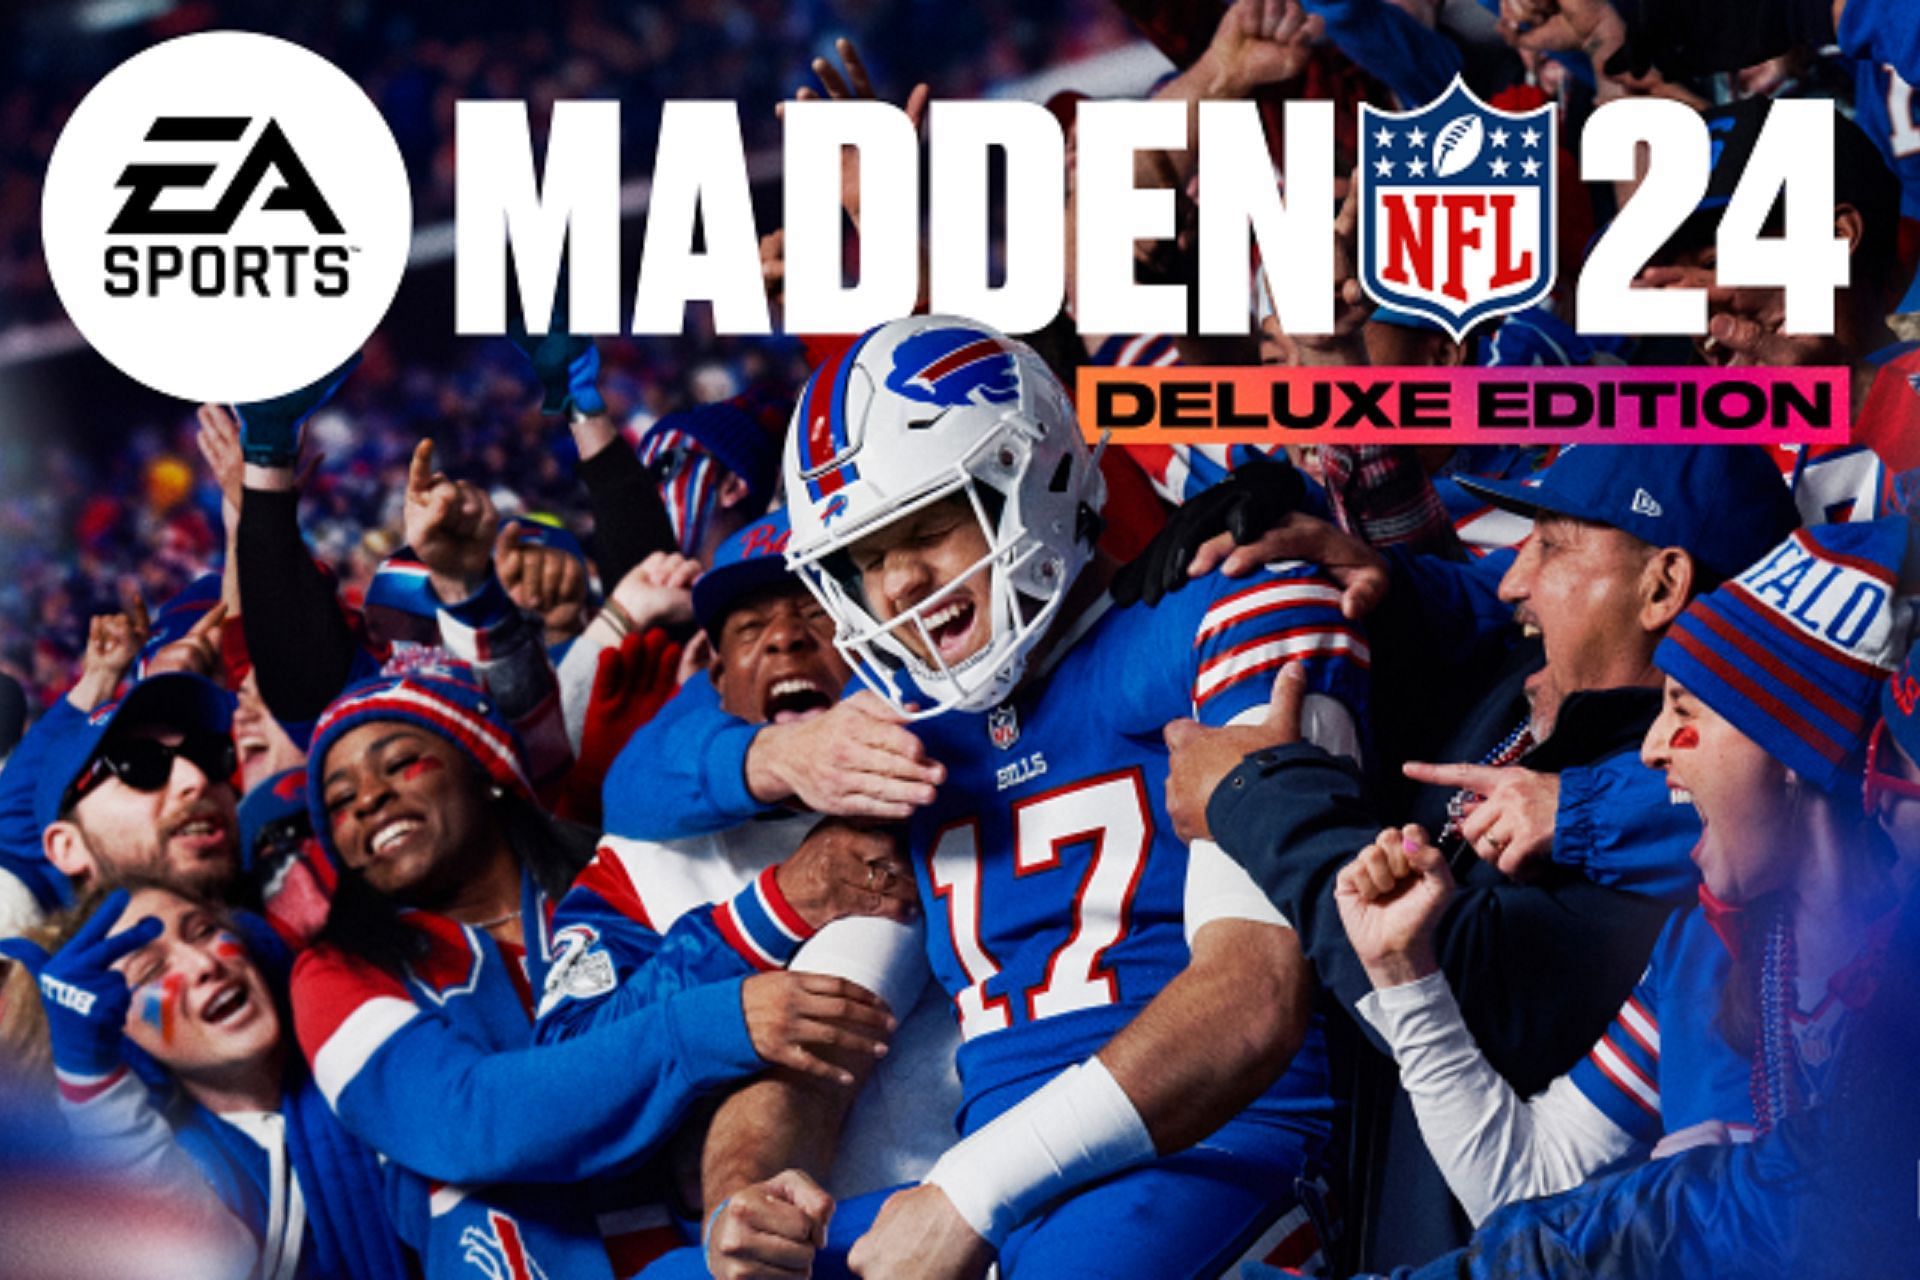 Madden 24 Beta: Top 5 new features uncovered so far ahead of August release (Pic Courtesy: EA.com)